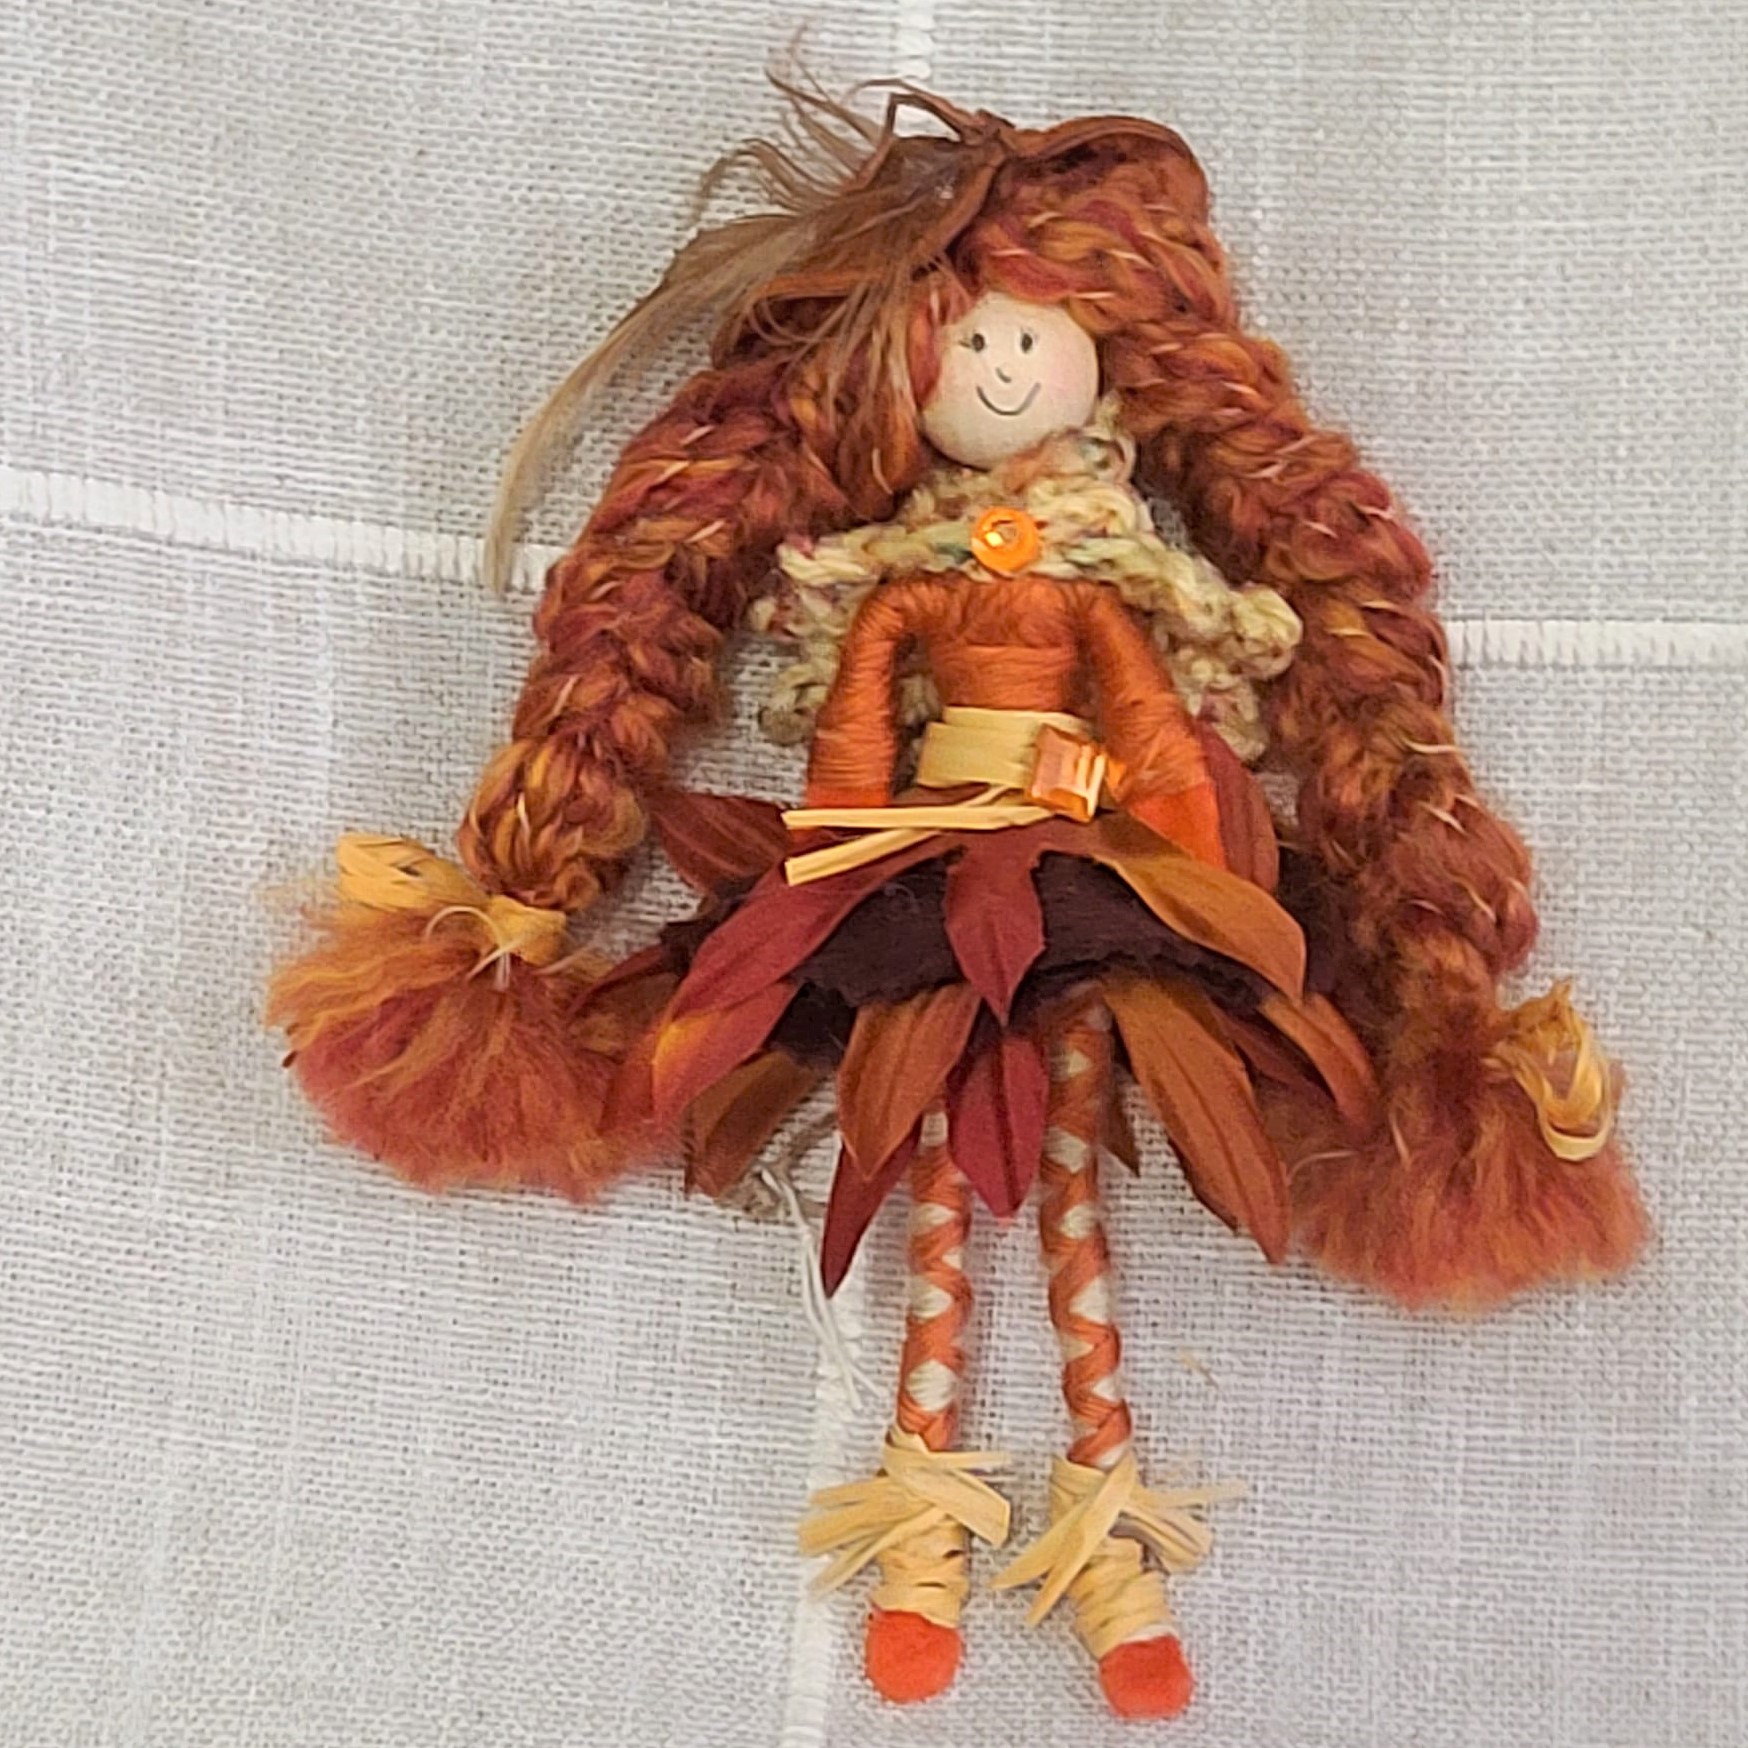 Handmade Autumn Robin Hood Doll with Feather in Hat - Click Image to Close